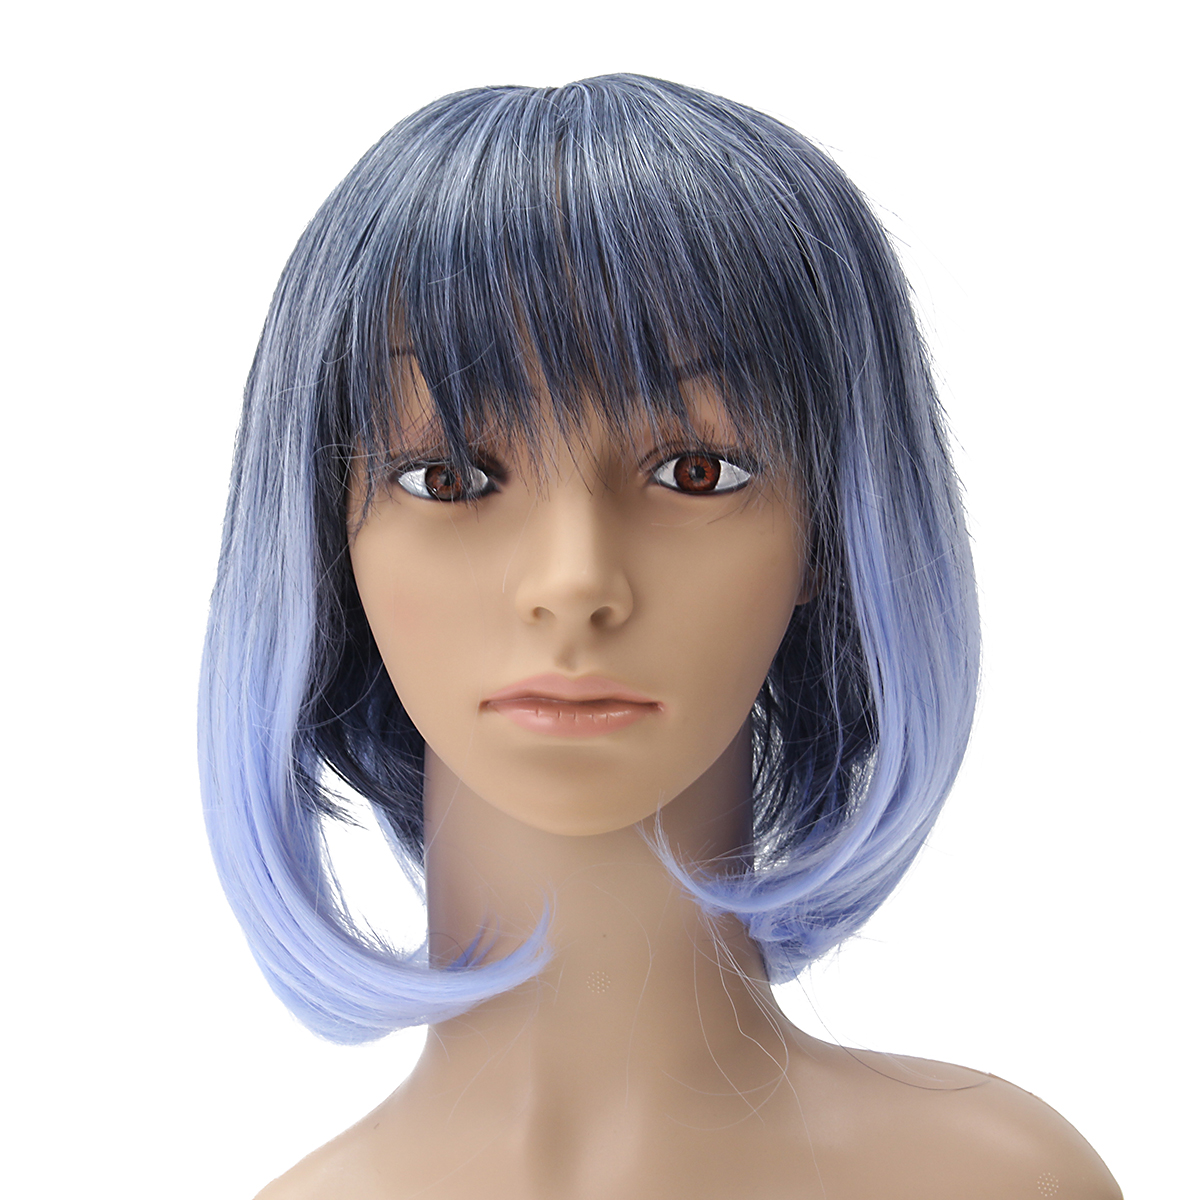 35-40cm-Blue-Gradient-Cosplay-Wig-Woman-Short-Curly-Hair-Anime-Natural-Role-Play-Capless-1133241